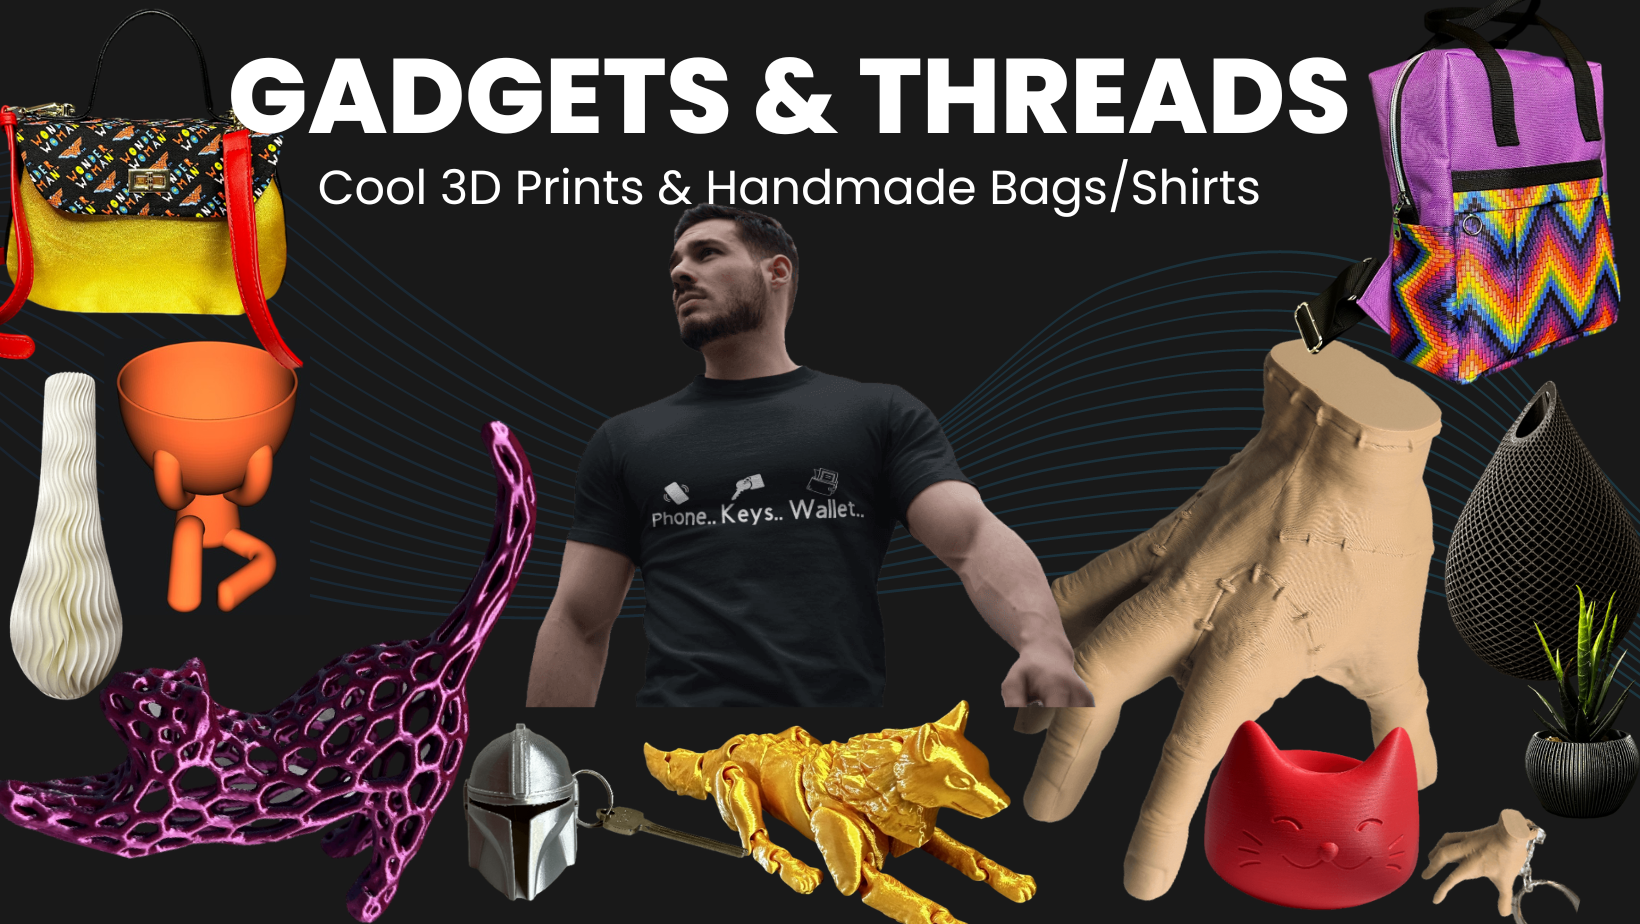 Image showing various 3D printed items(Thing hand,articulated wolf,mandalorian helmet keychain,smiley face cat bowl,etc..) as well as some handmade bags for sale at GadgetsAndThreads.com